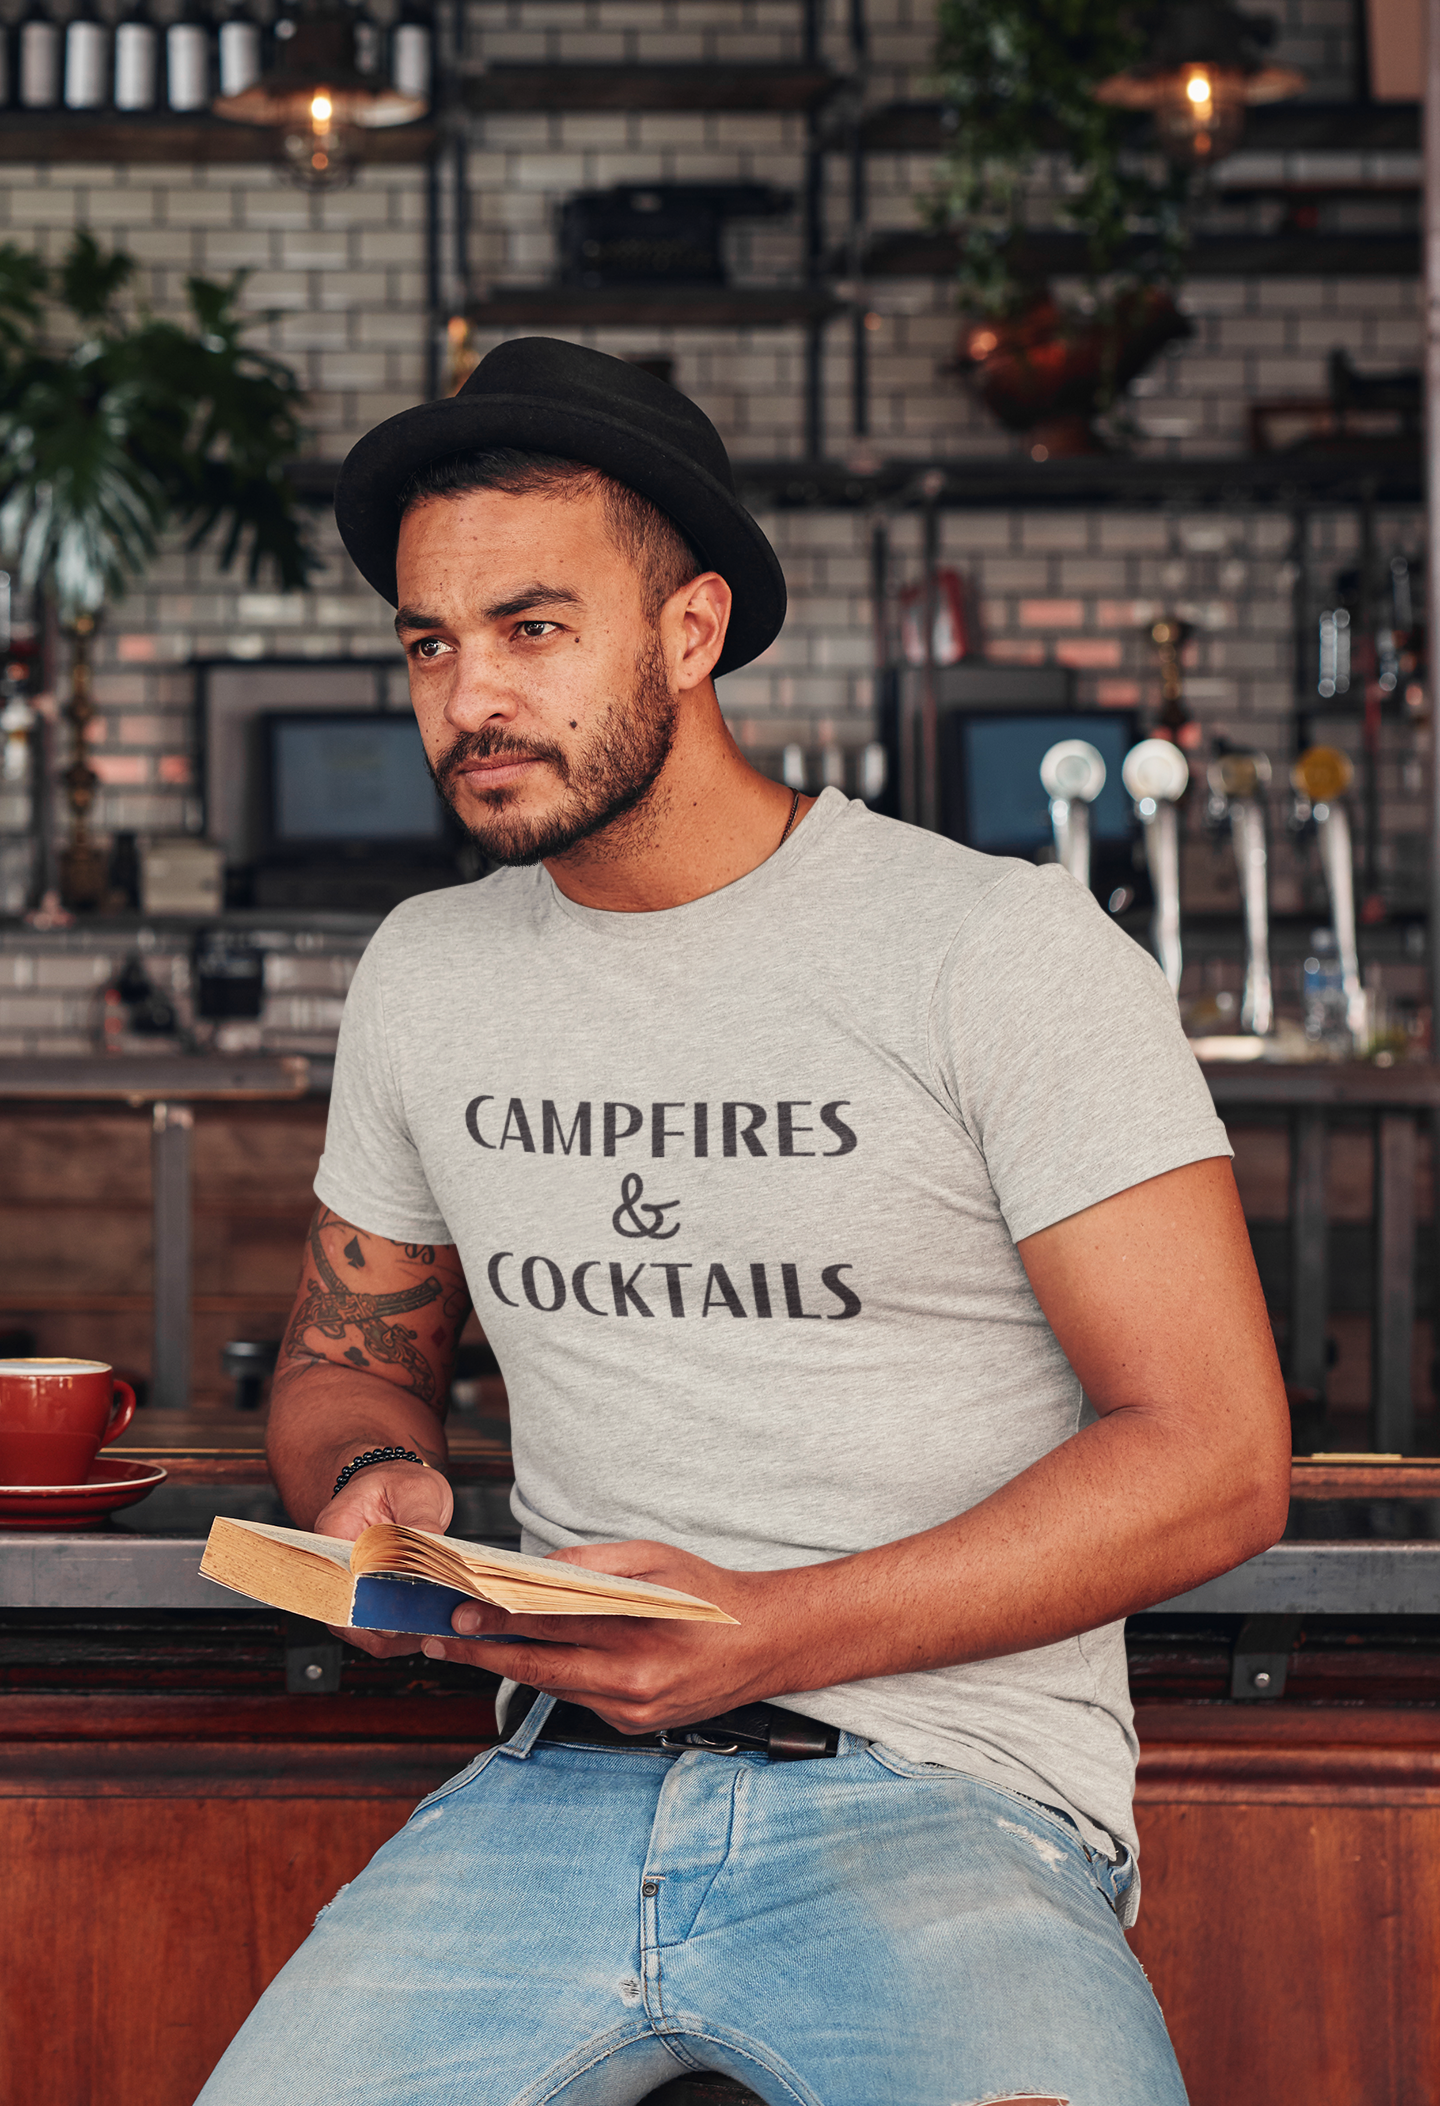 Campfires & Cocktails - T-Shirt in Heather oatmeal. The front of the shirt has a black bold font with campfires & cocktails on it. This is the front view of the shirt on a male model holding a book in a bar like setting with black lid hat and light dem jeans.